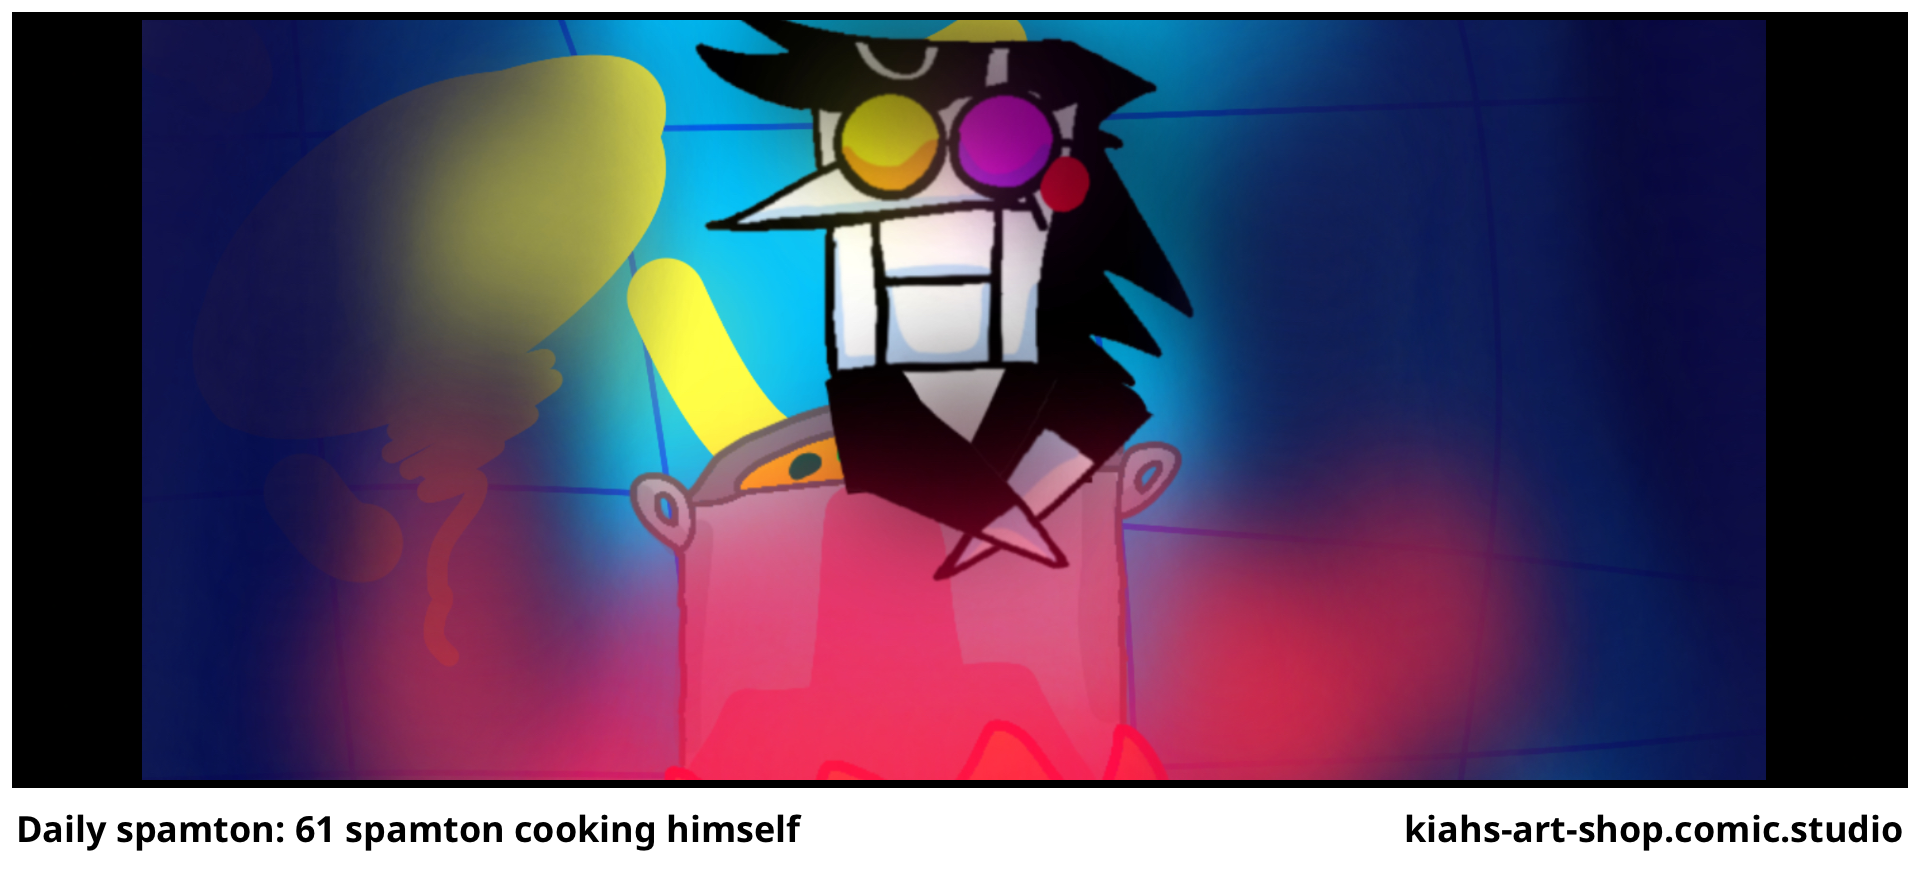 Daily spamton: 61 spamton cooking himself